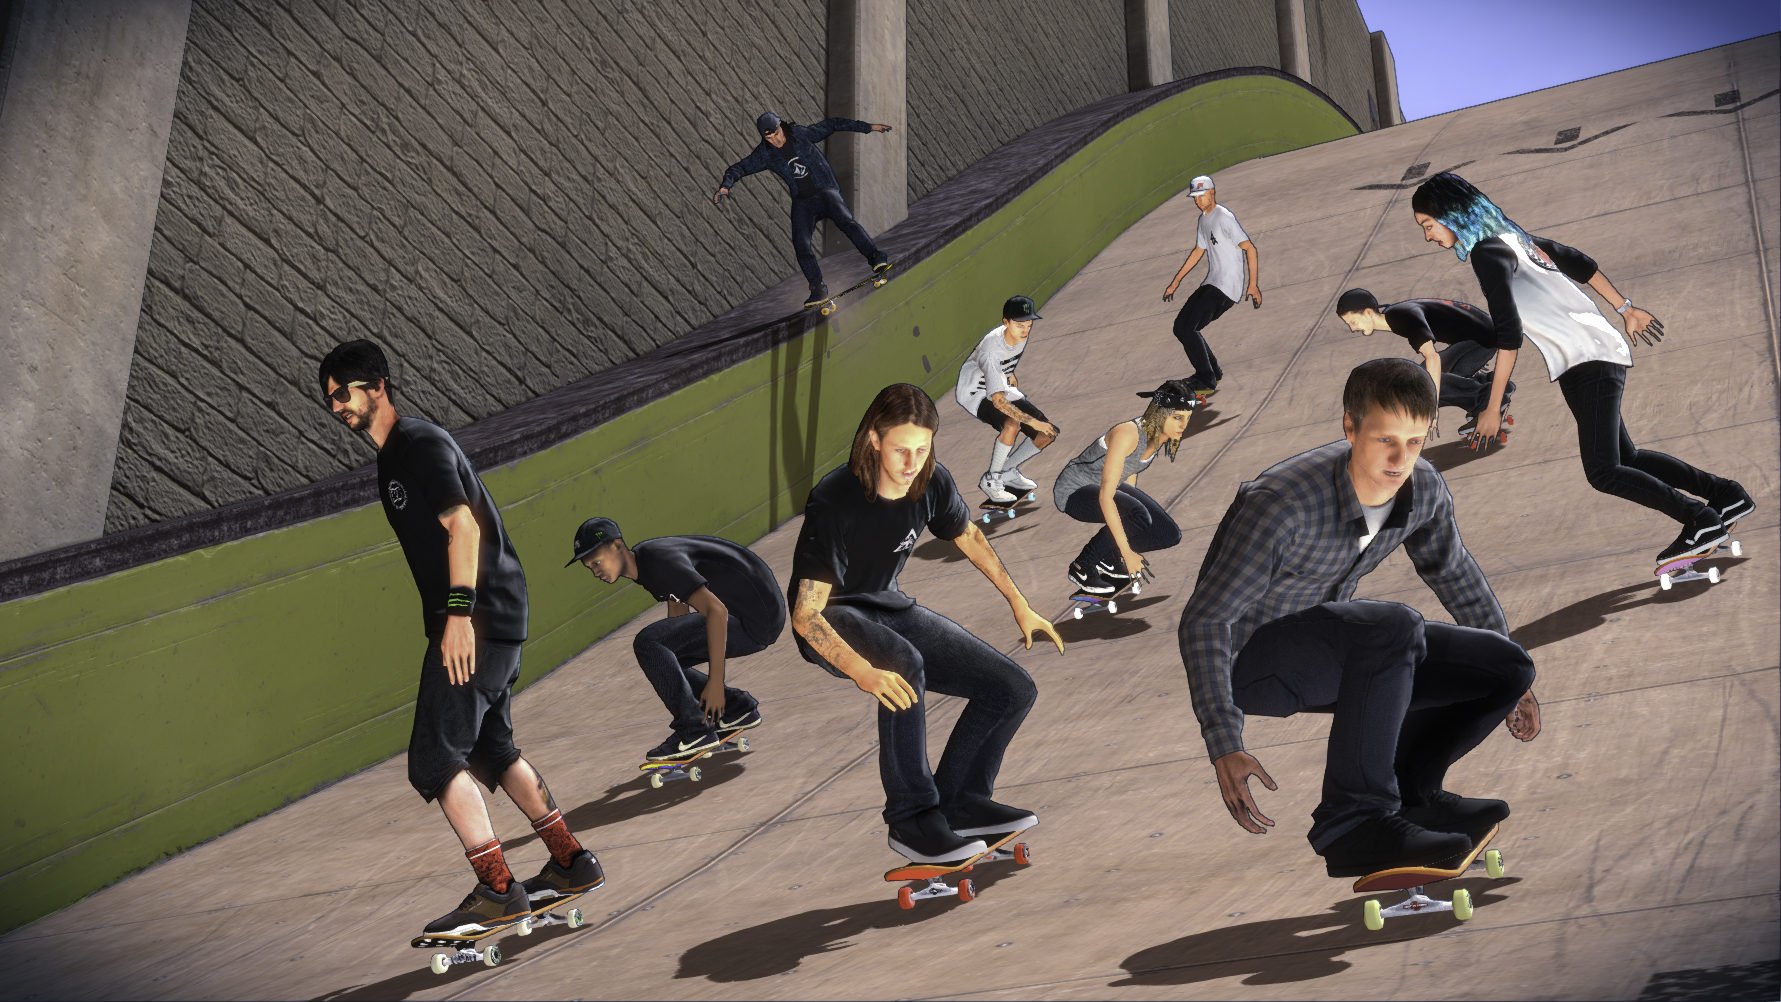 Tony Hawk's Pro Skater 5 Pics, Video Game Collection